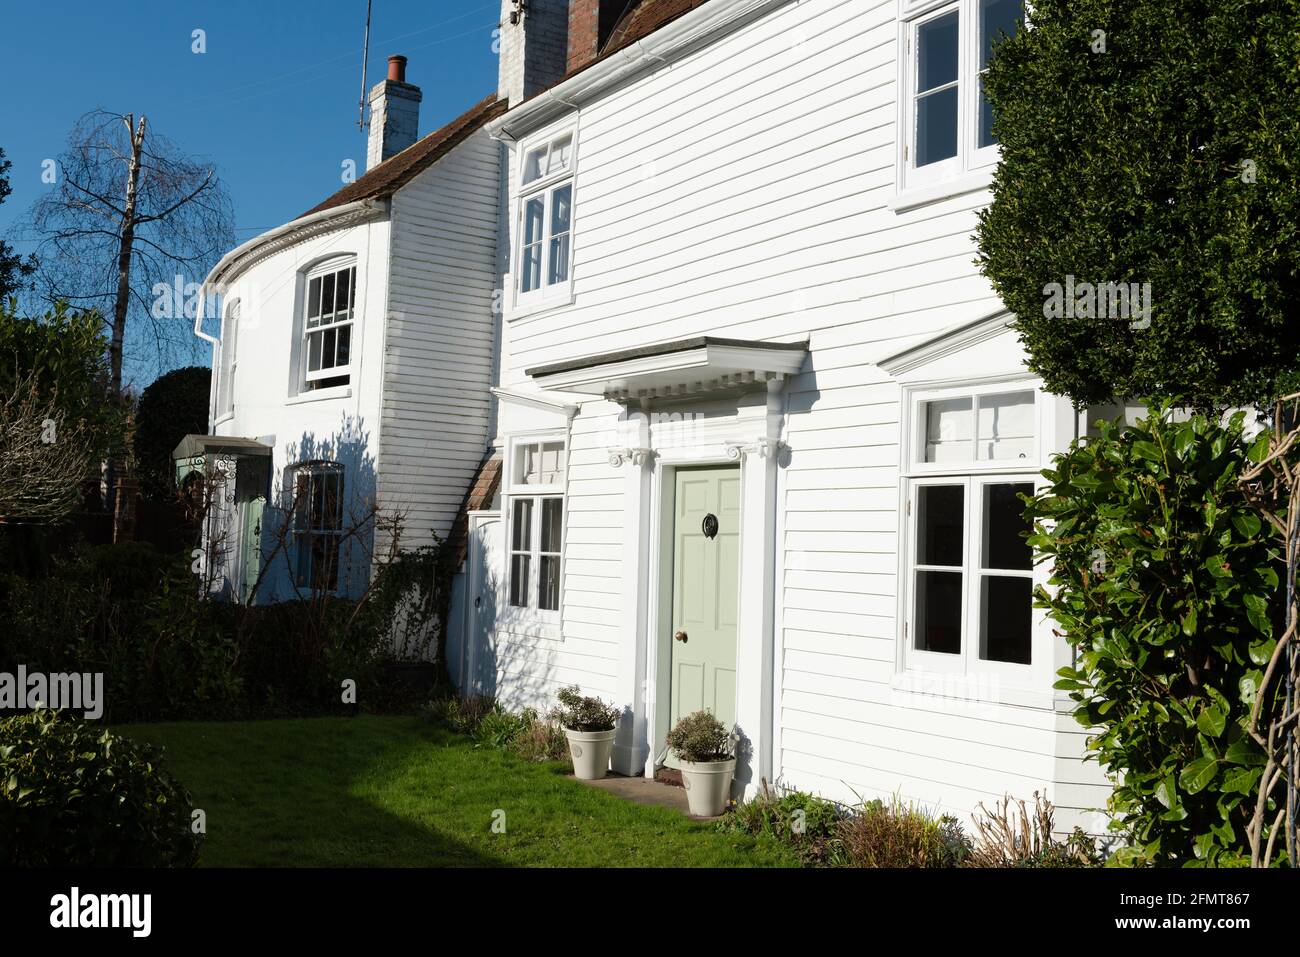 Two whiewashed houses, one weatherboarded and the other with a convex frontage, near to the centre of the market town of Horsham in West Sussex, Uk Stock Photo